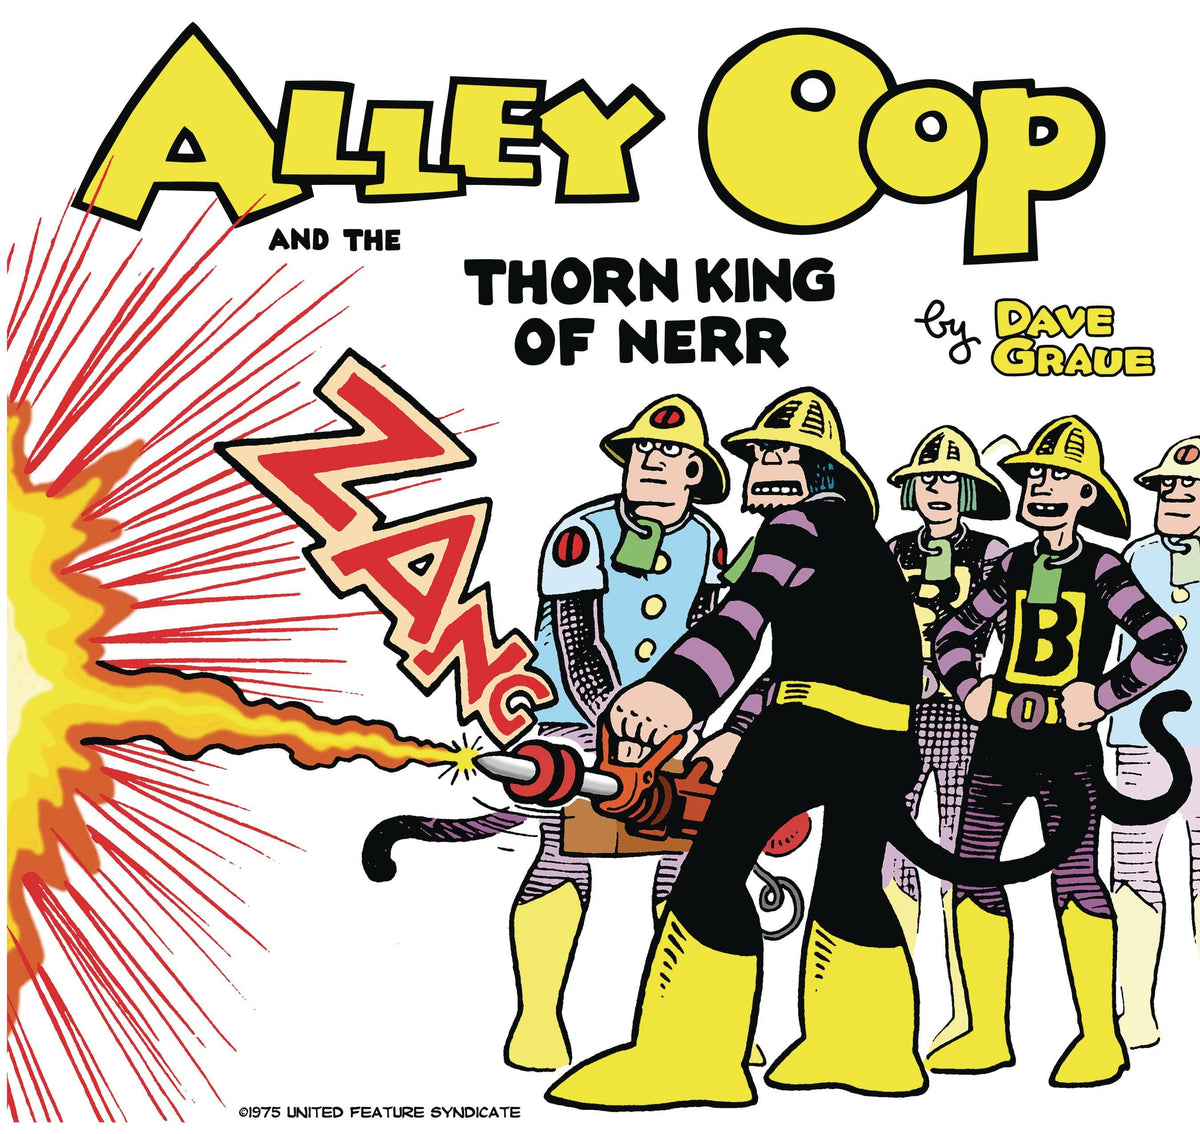 ALLEY OOP AND THORN KING OF NERR - Third Eye